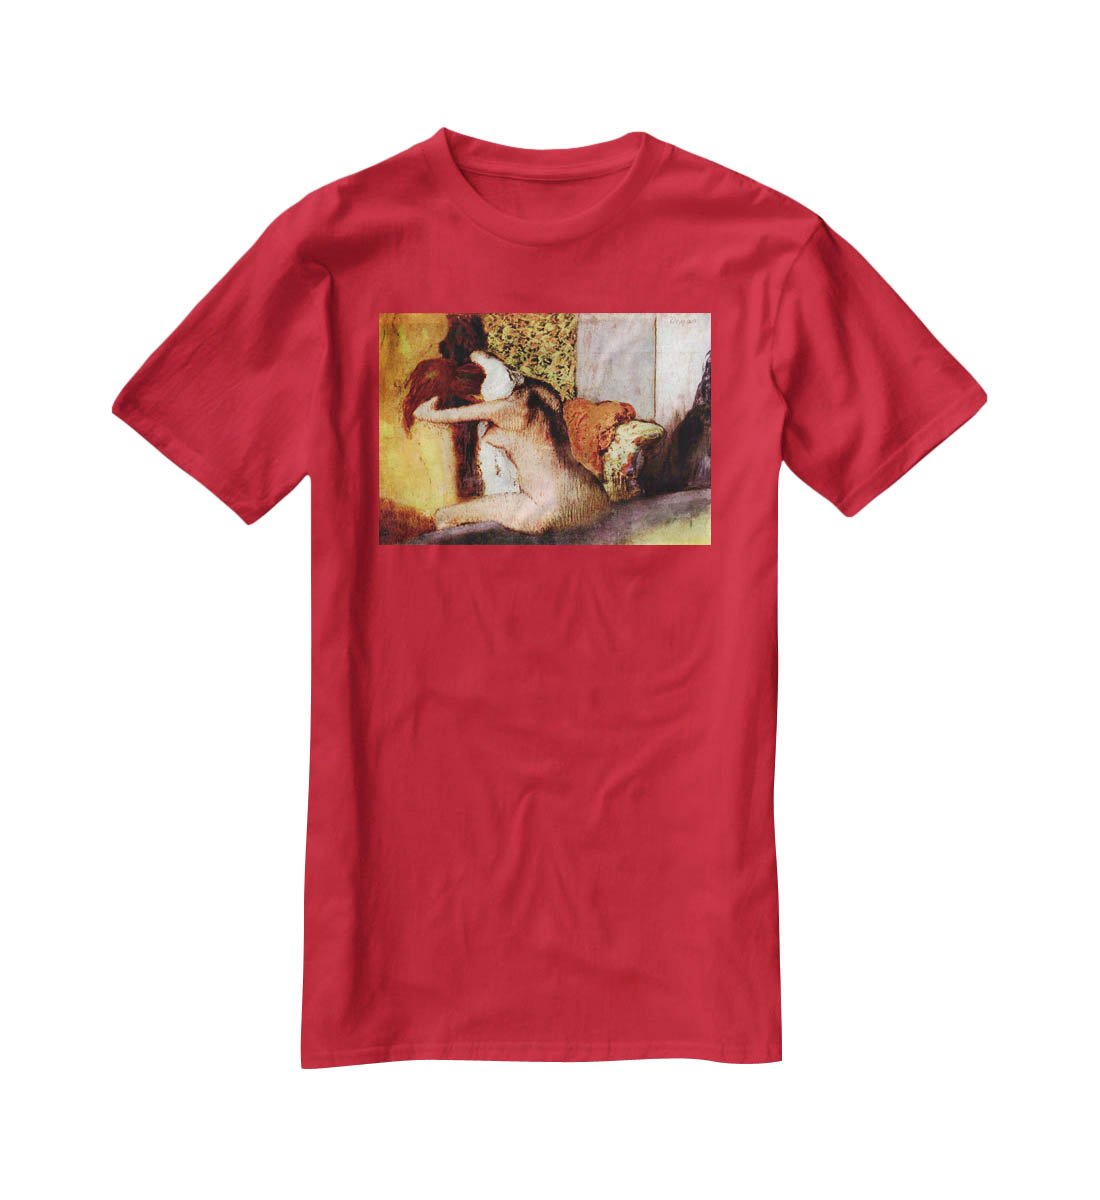 After bathing 2 by Degas T-Shirt - Canvas Art Rocks - 4